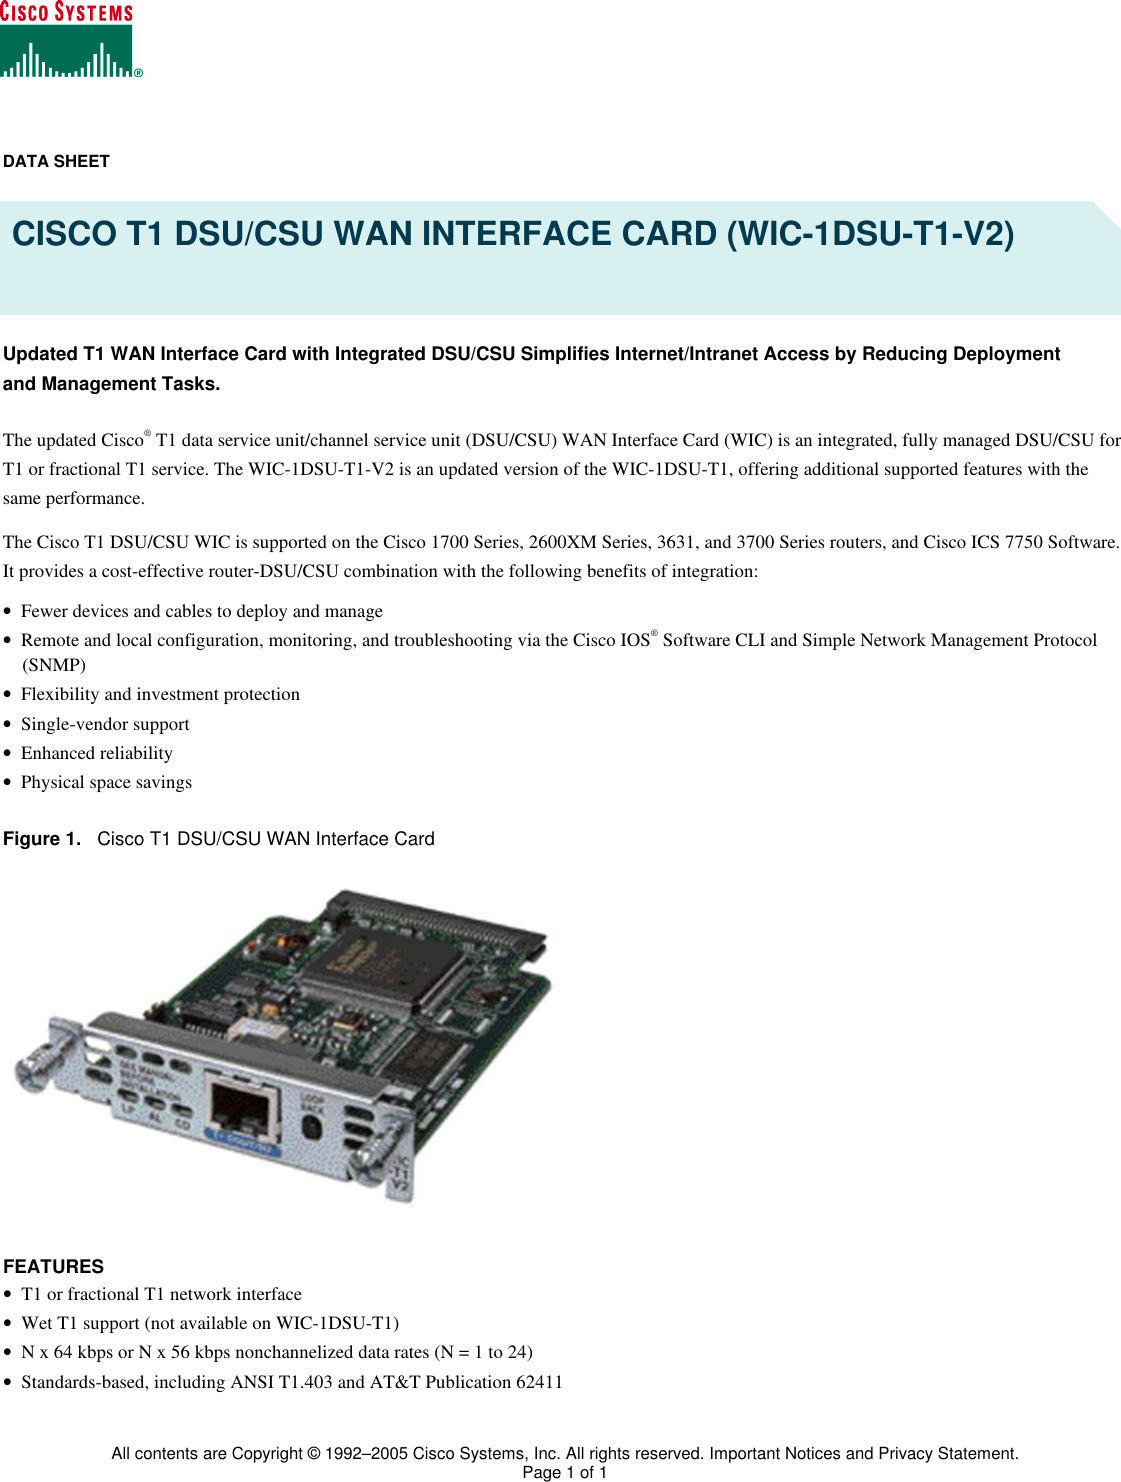 Page 1 of 7 - Cisco-Systems Cisco-Systems-Wic-1Dsu-T1-V2-Users-Manual 09186a008032305b_guest-Cisco_1700_Series_Modular_Access_Routers-us-Product_Data_Sheet-en_2pdf